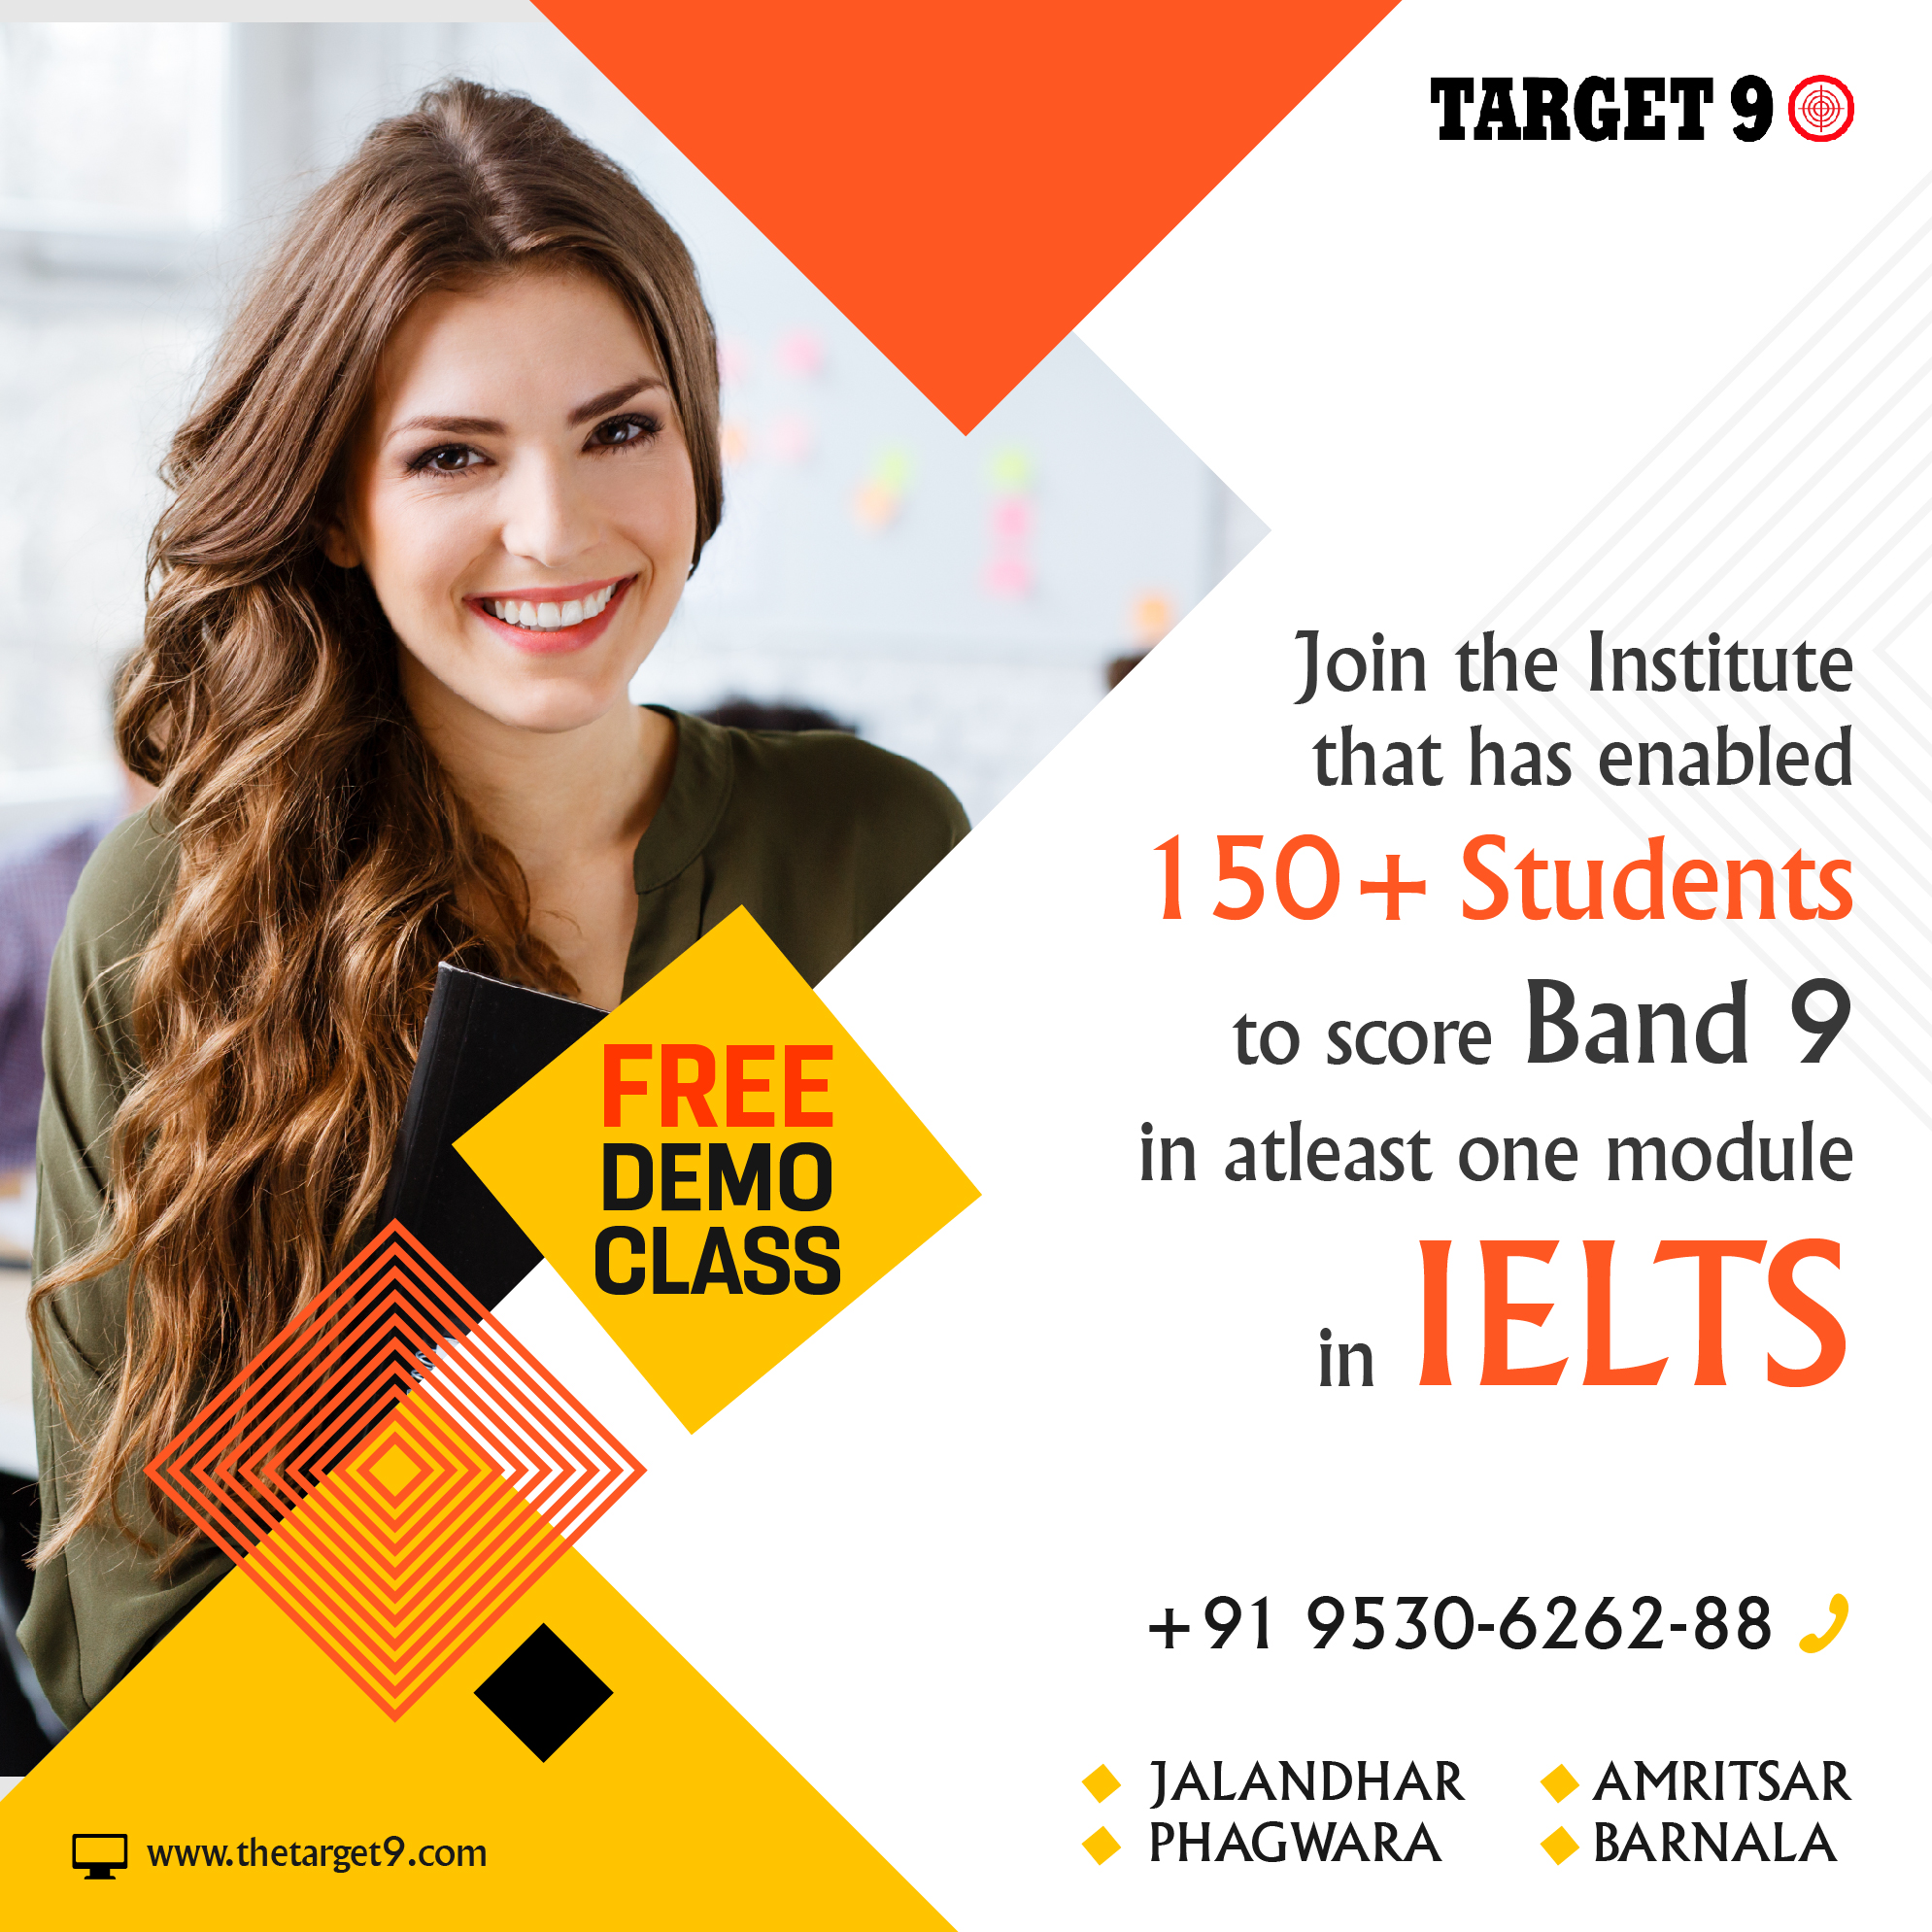 Target9 on X: As best IELTS coaching centre in Punjab, Target 9 provides  result-oriented IELTS classes with vast study material & individual  attention. Get a free demo class before joining. Book Free